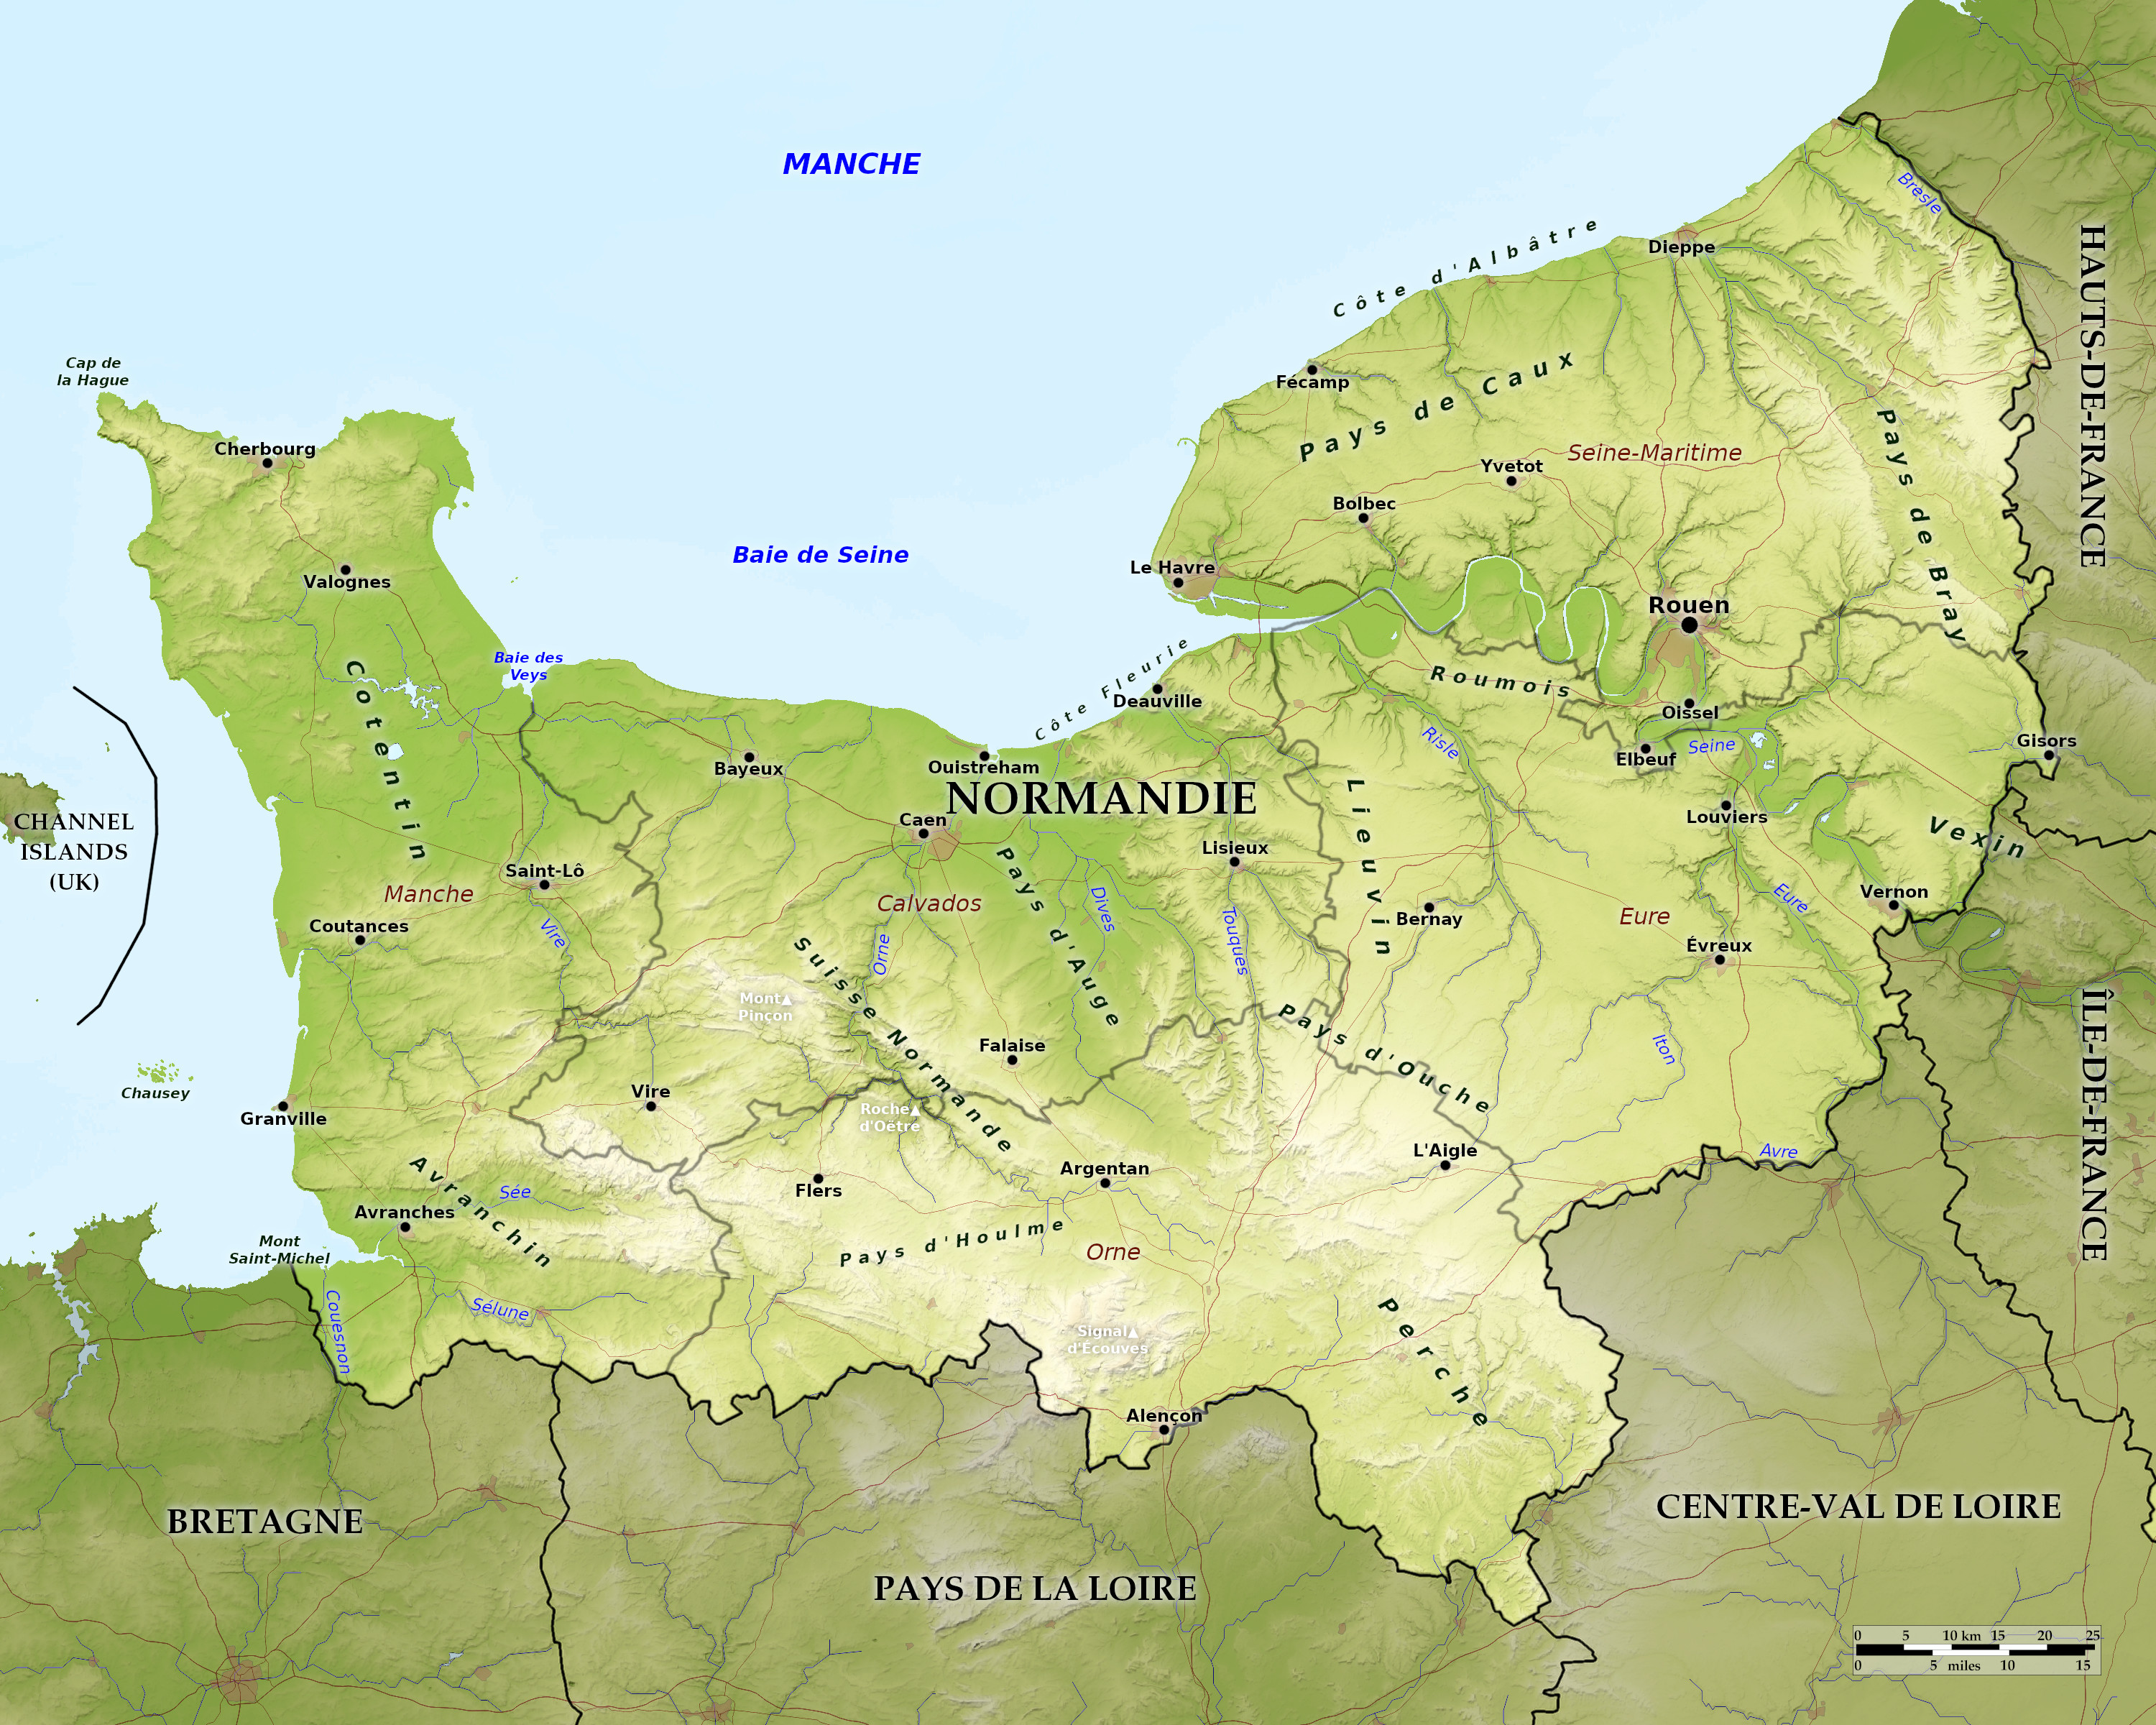 Blue Green Atlas - Free relief map of France - Normandy (Normandie)